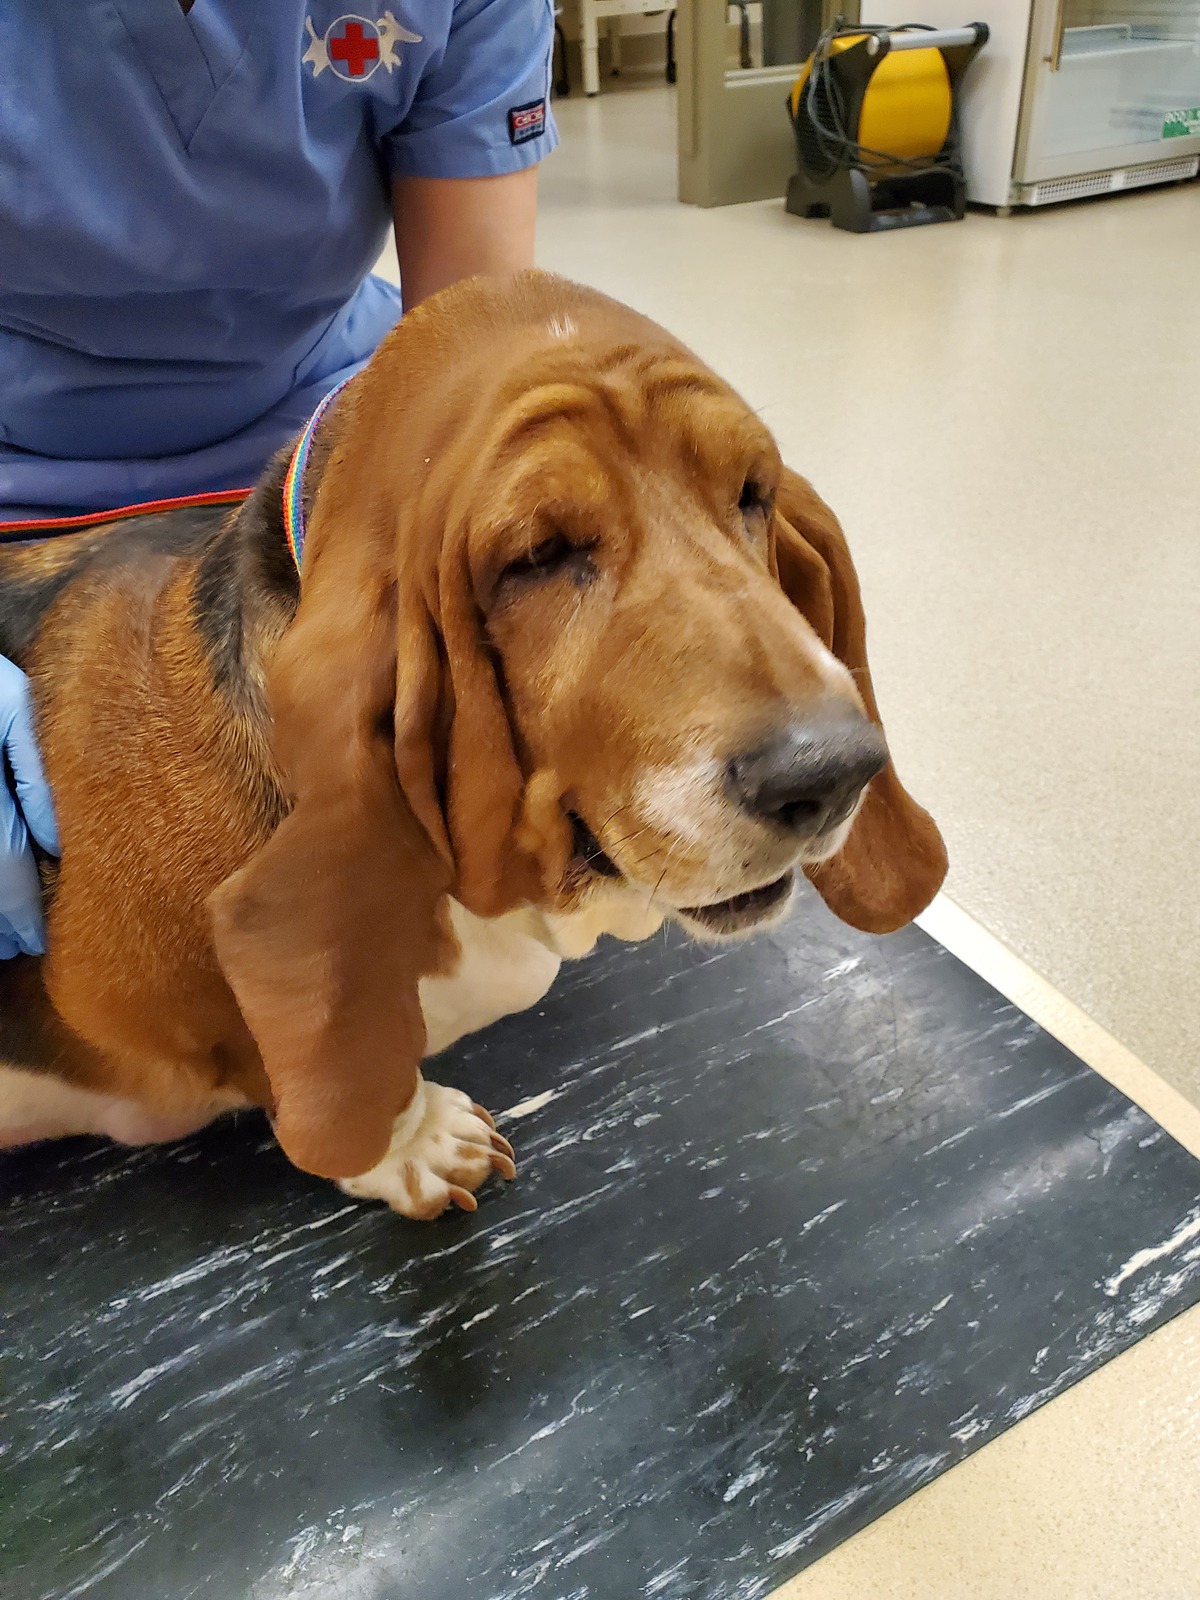 A close-up shot of a basset hound's face during a veterinary exam